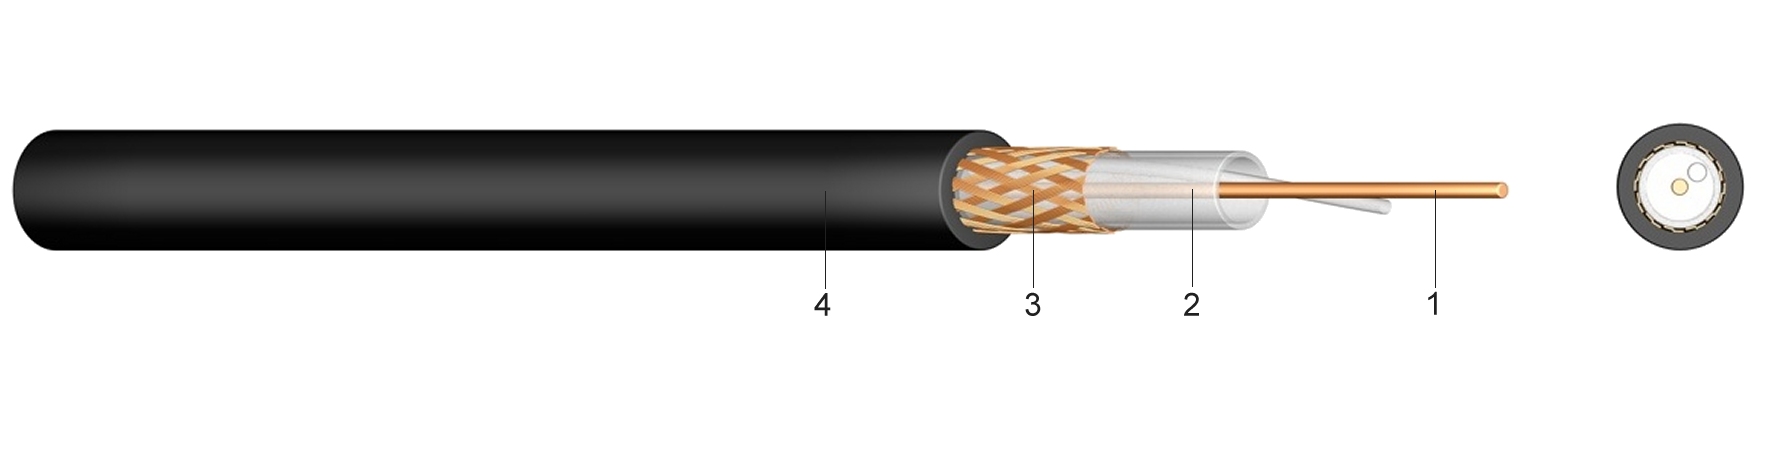 Coaxial Cable RG62.jpg